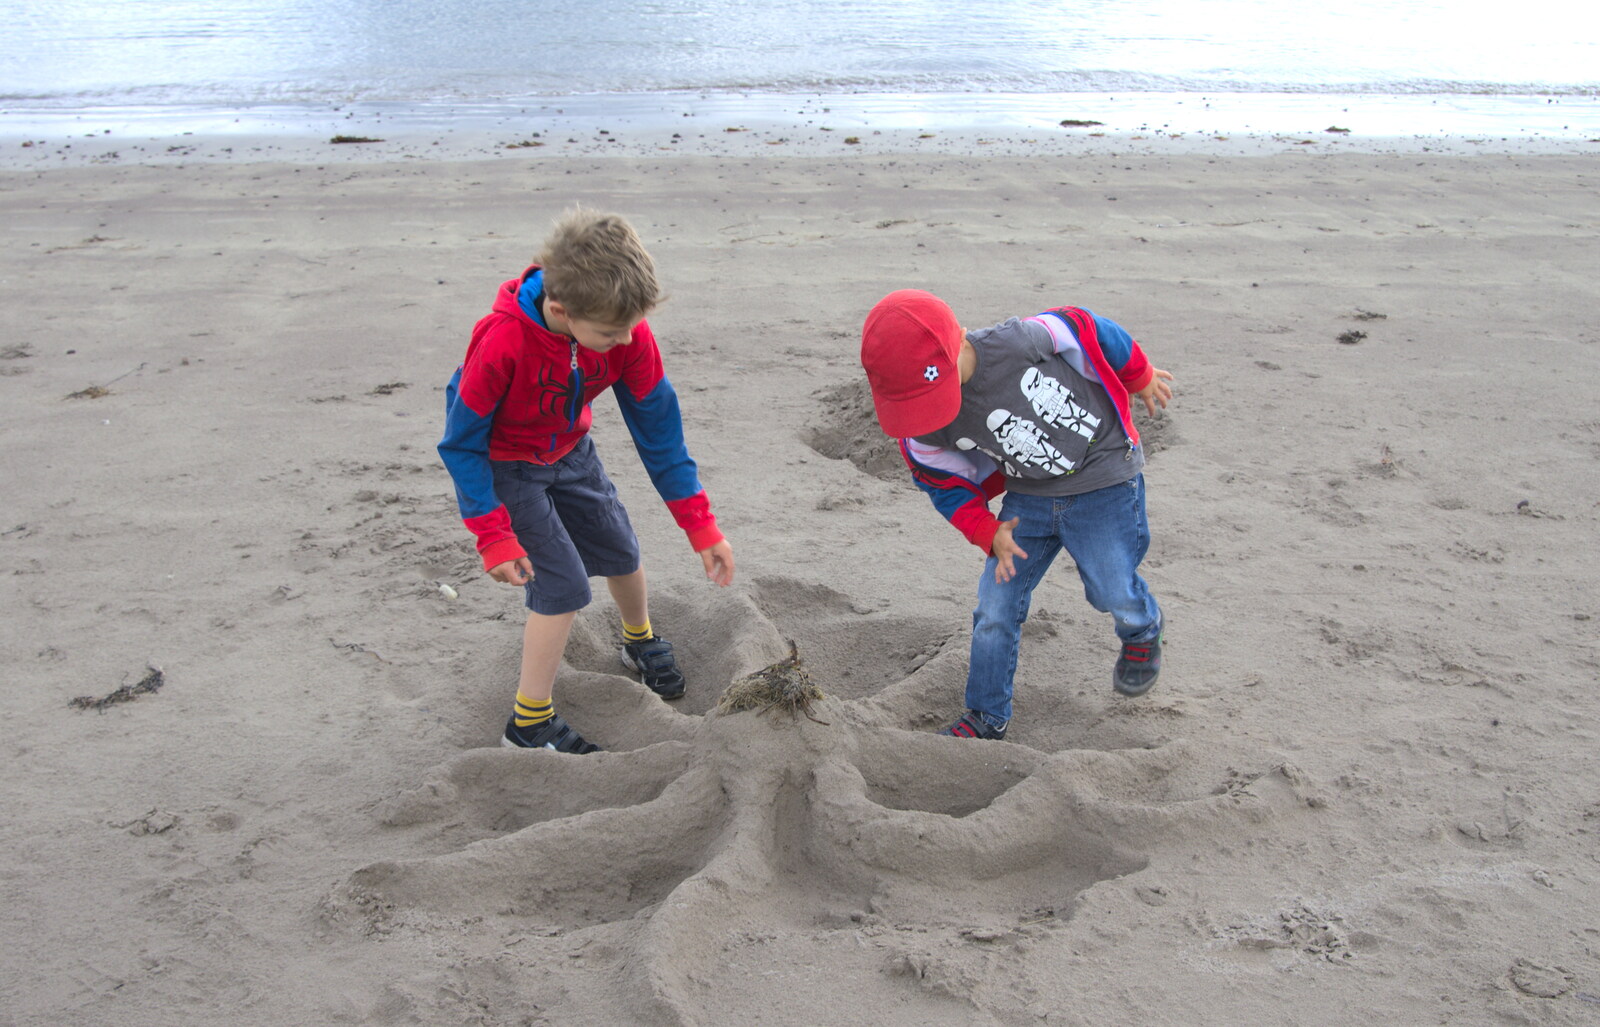 Fred and Harry find a sand-sculpture octopus from Baile an Sceilg to An tSnaidhme, Co. Kerry, Ireland - 31st July 2017